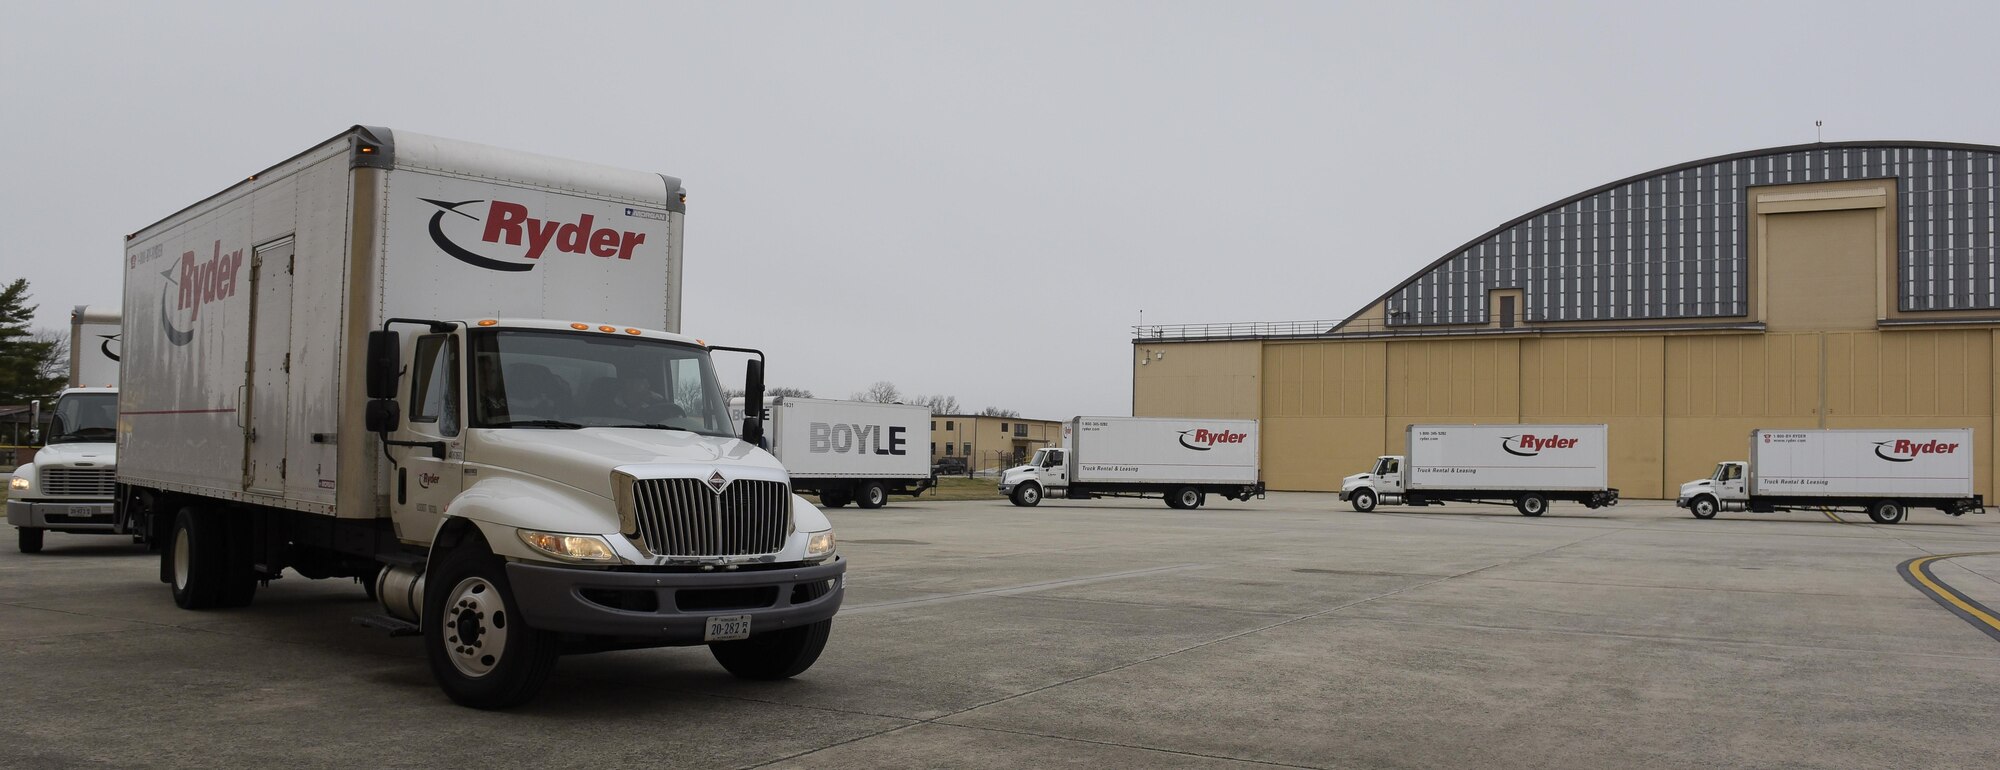 Trucks containing materials from President Obama's administration pull up outside of a hangar on Joint Base Andrews, Md. Feb. 14, 2017. Standing by to receive the materials were Joint Records Team (JRT) members made up of Airmen assigned to the Air Force District of Washington (AFDW) and Soldiers from the U.S. Army's 3rd Infantry Division "The Old Guard" worked in concert with Presidential Material Handlers from the National Archives and Records Management (NARA) over several months to ensure the safe movement of the records and artifacts gathered during the eight years of President Obama's administration. The JRT was tasked with helping to inventory, prepare for shipping, palletize and load several tons of paper records, terabytes of electronic records, and thousands of artifacts. Along with several truck shipments the bulk of the materials were loaded onto and Air Force C-5 Galaxy cargo aircraft brought in from Dover Air Force Base, Del., and were then flown to Chicago, Ill., where they were placed in secure storage until completion of Obama's Presidential Library. The library is part of the presidential library system, which is administered by the National Archives and Records Administration. (U.S. Air Force photo/Jim Varhegyi) (released)